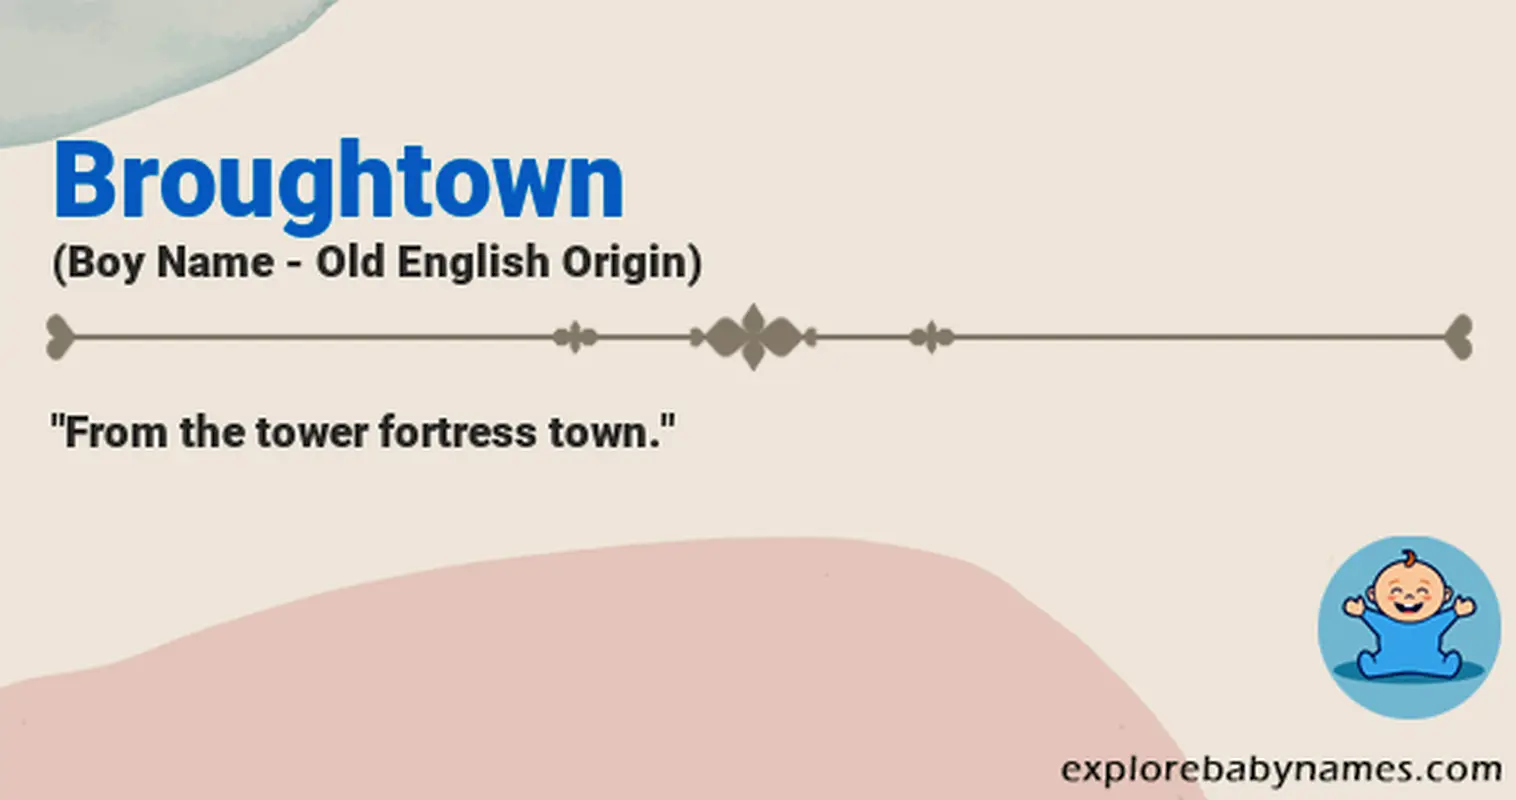 Meaning of Broughtown